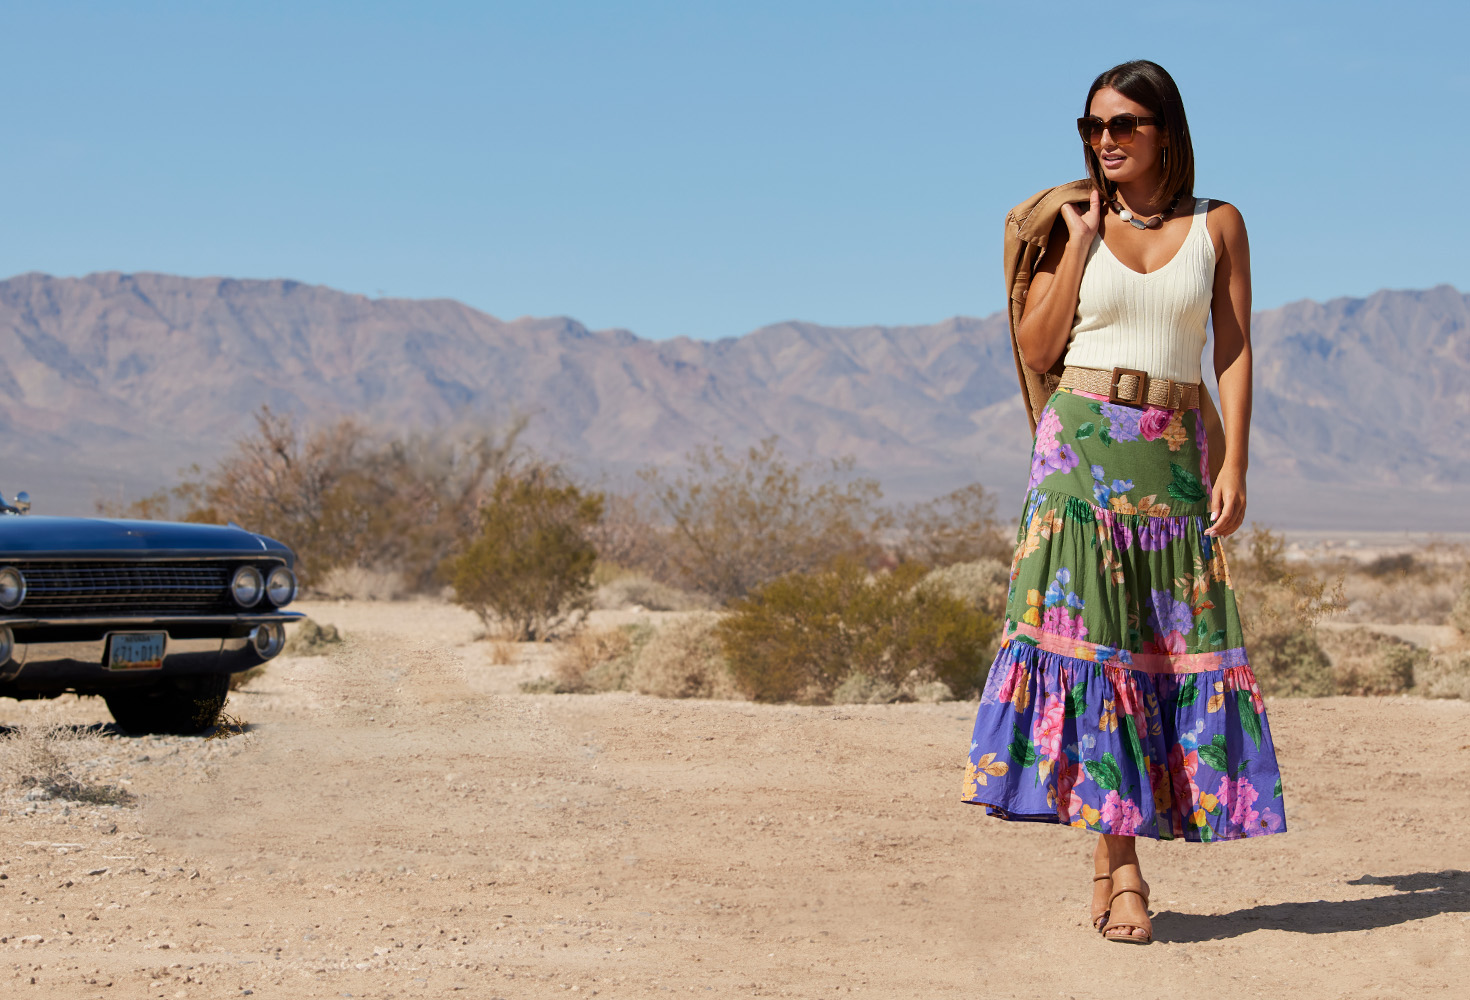 Model wearing an off-white wide ribbed sweater tank top, brown belt, multicolor floral print maxi skirt, tan sandals, and sunglasses with a brown jacket slung over her shoulder.